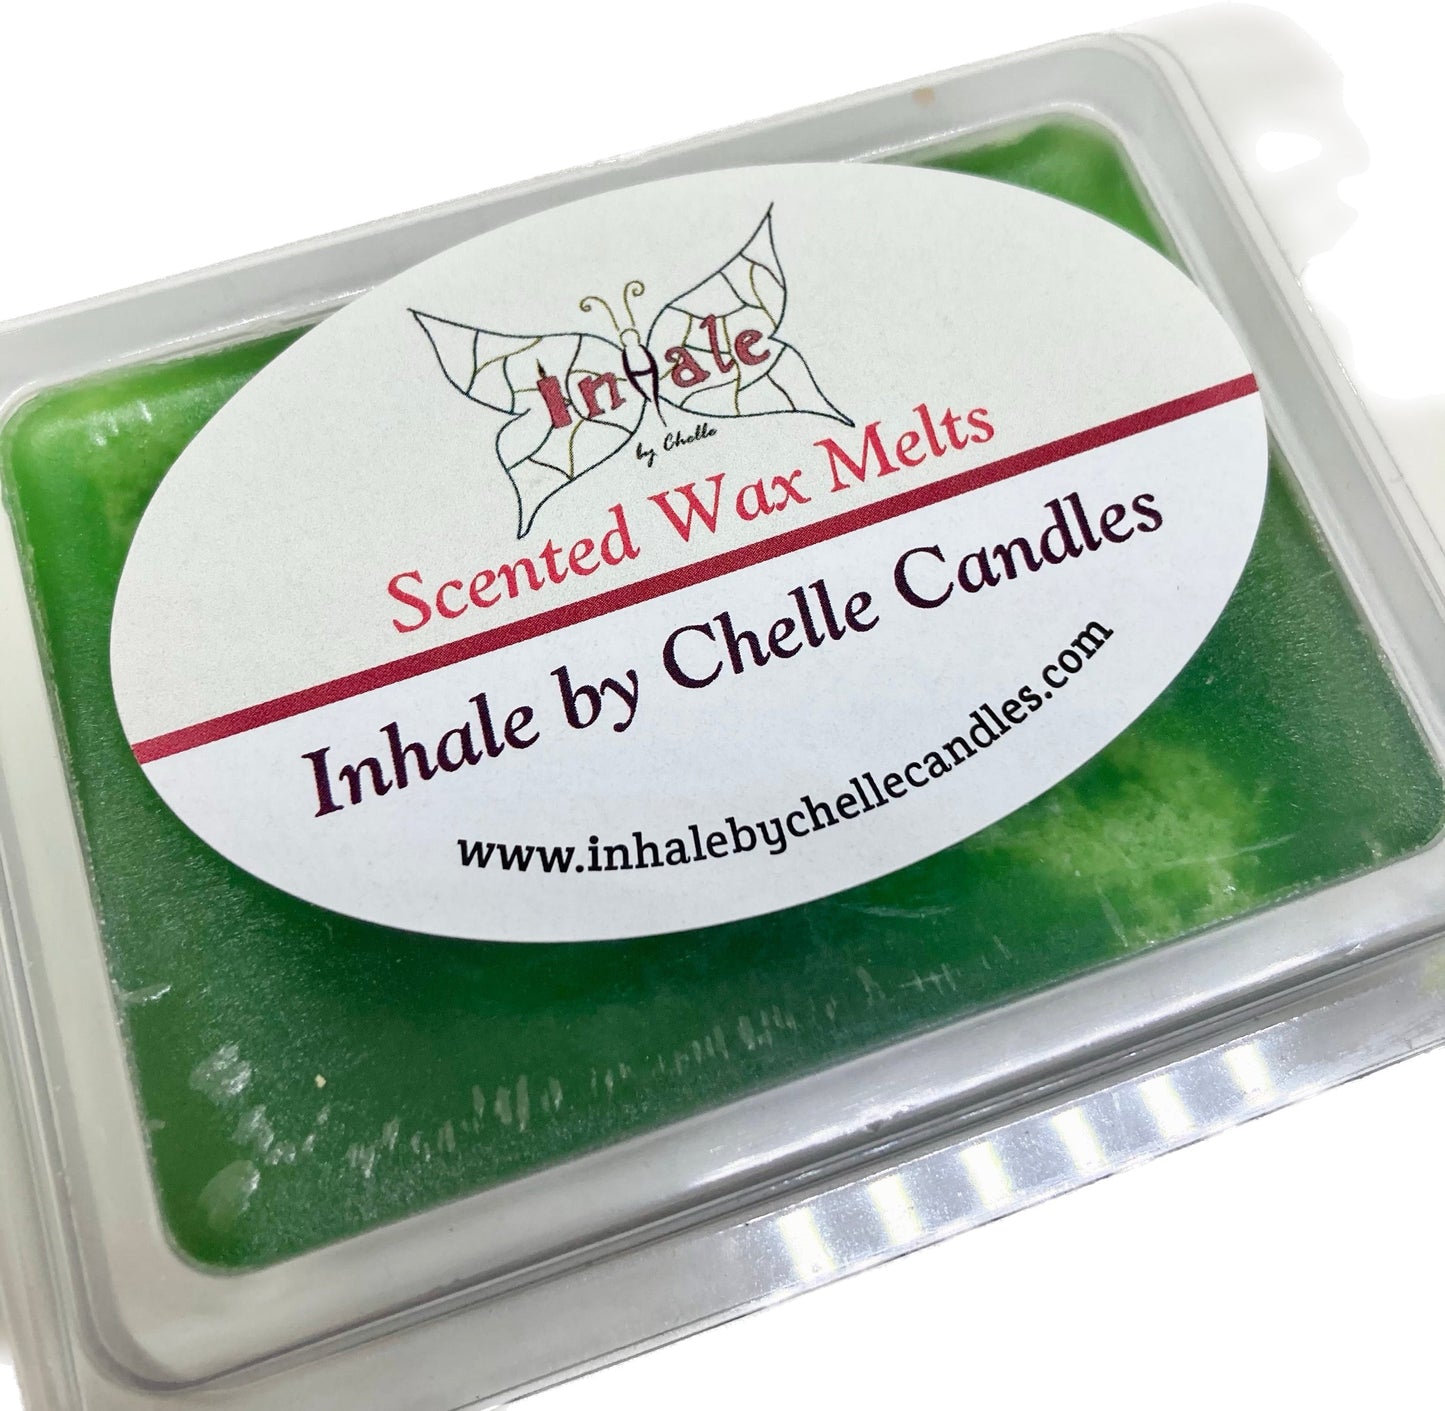 Scented Wax Melts/Cubes in a Clamshell Mold